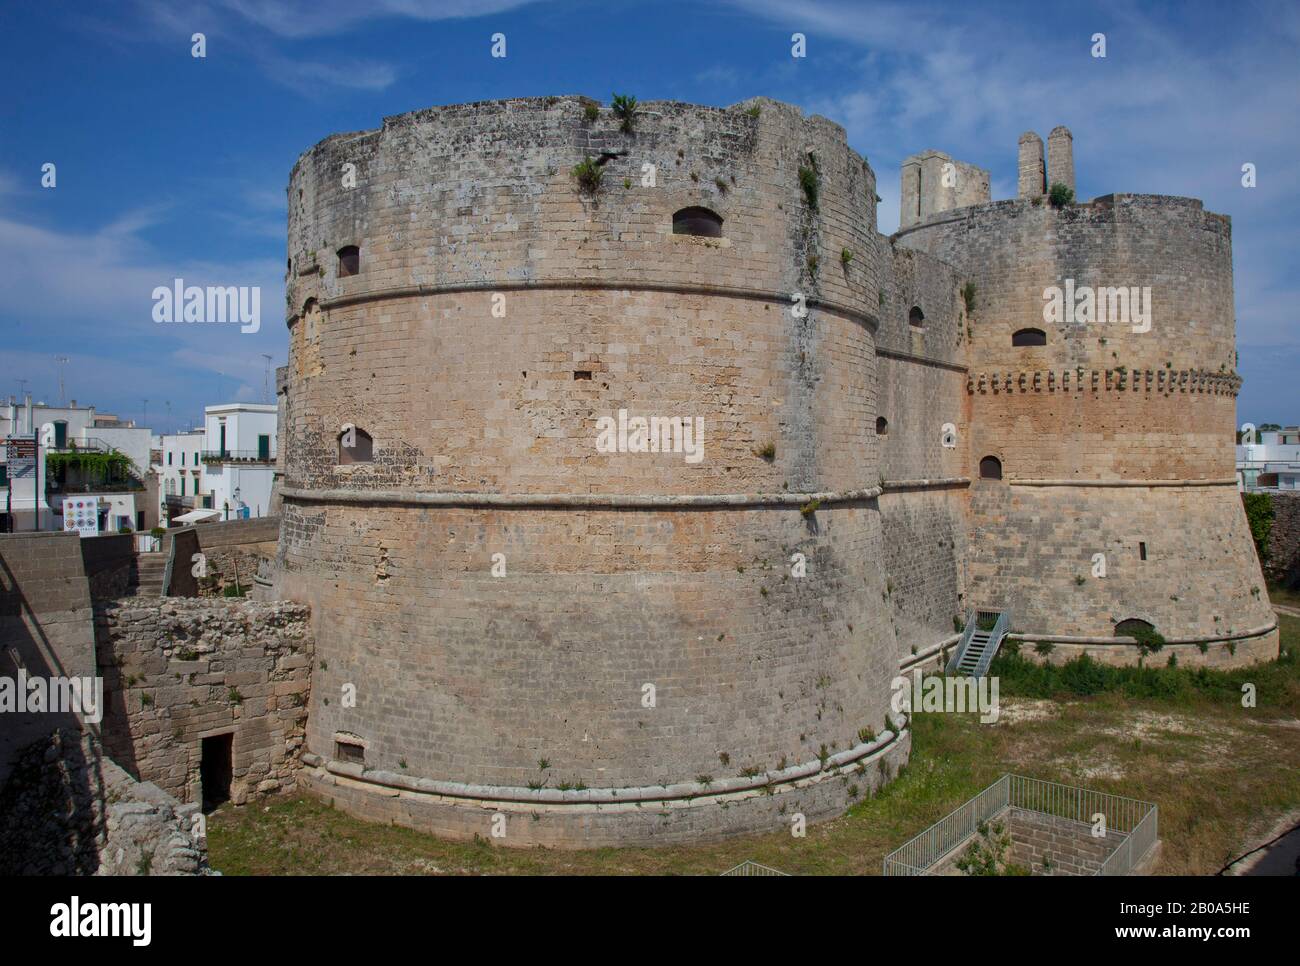 Castello Aragonese. The imposing castle of  Otranto, a coastal  town in the Apulia region of Southern Italy. June 2018 Stock Photo